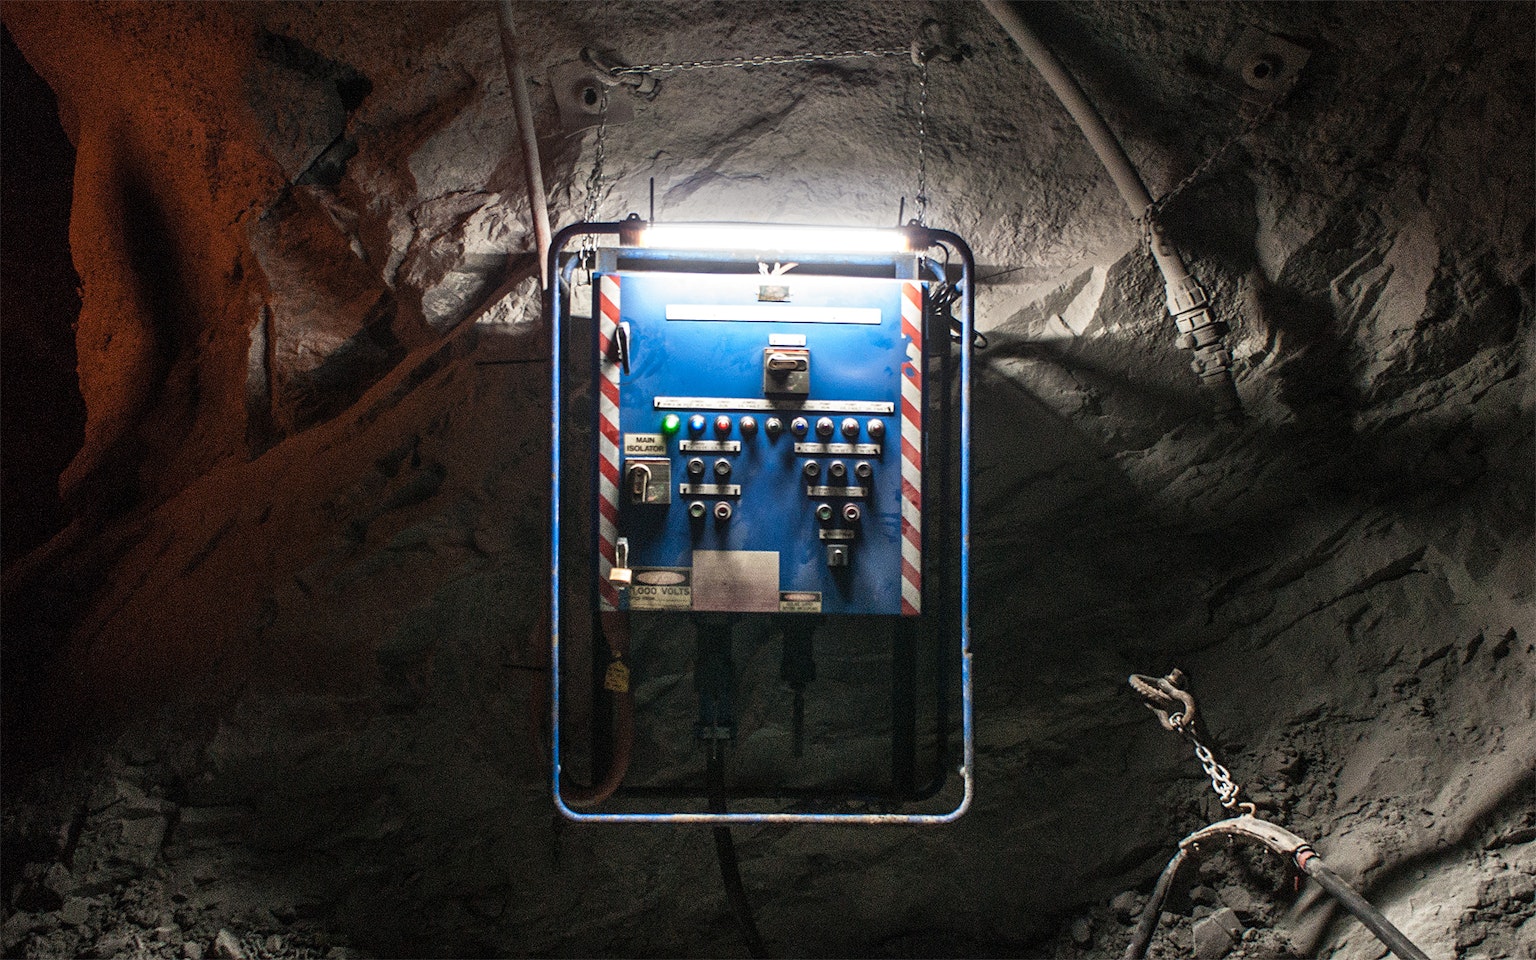 AC2 Mining Lead Light in application, installed in an underground mine over a switch board